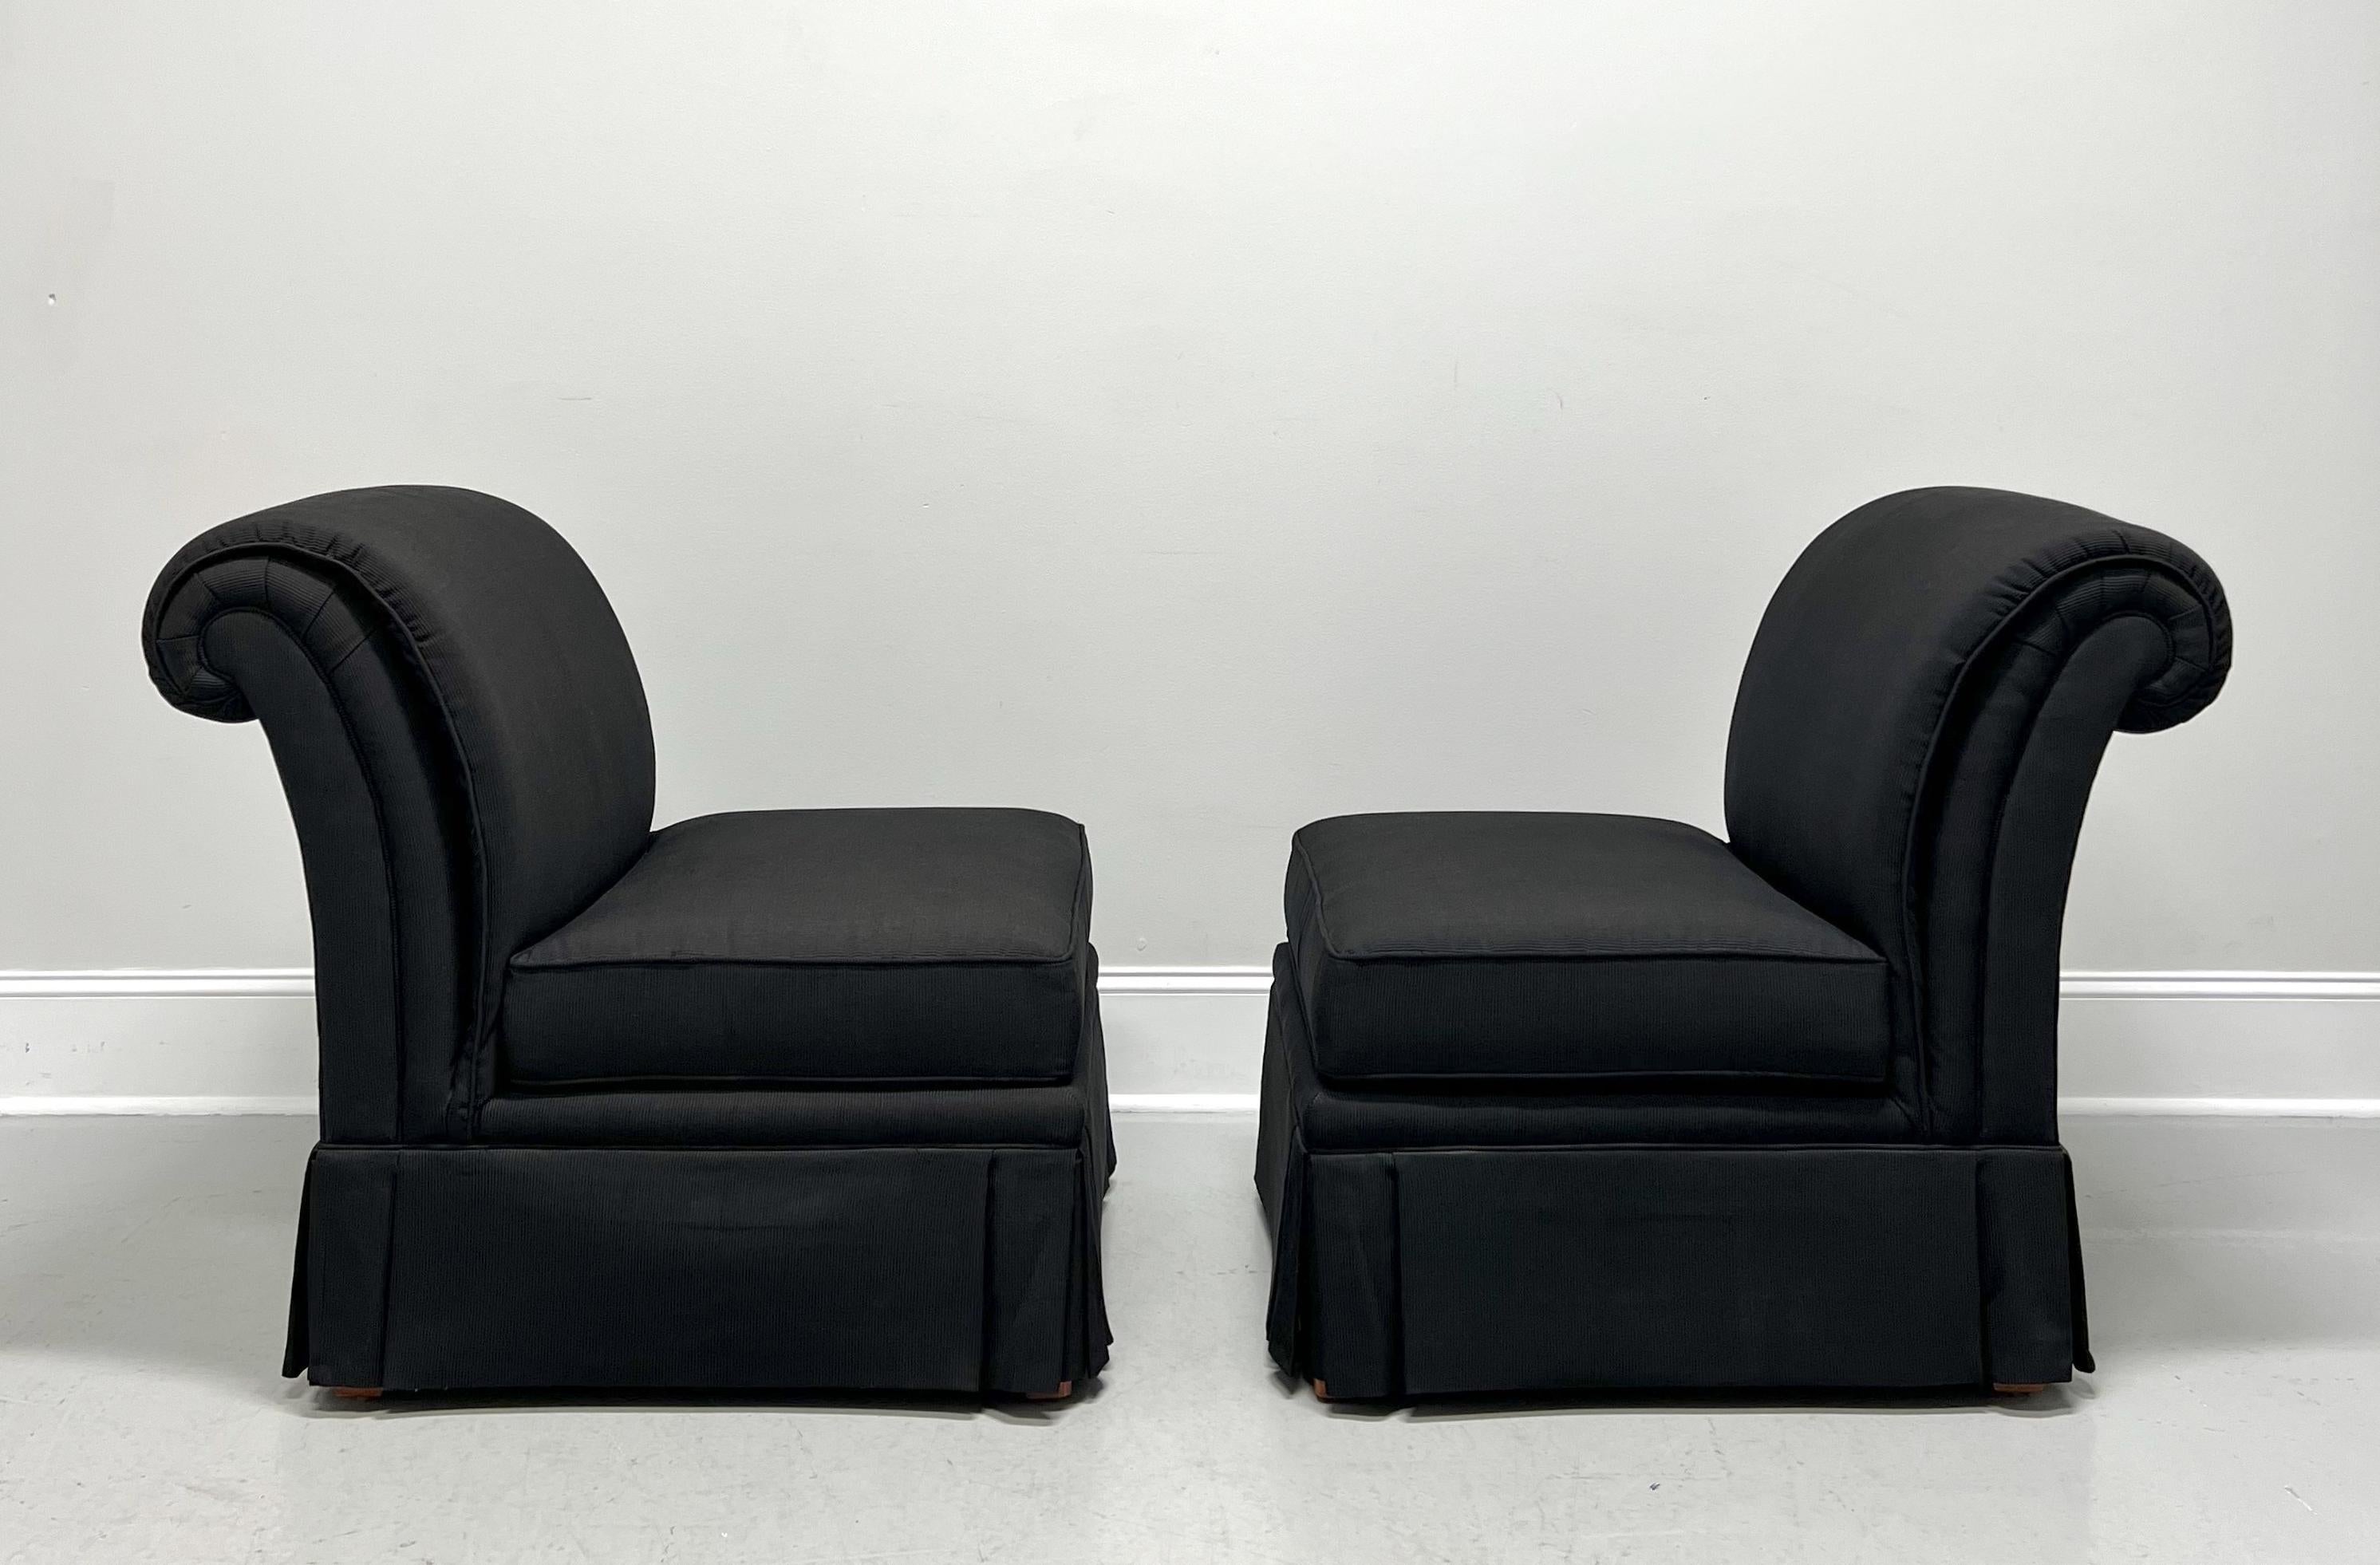 A pair of Contemporary style slipper chairs by Henredon. Solid wood frame, slipper armless design with a roll back, black color narrow wale corduroy fabric upholstery, reversible seat cushion, and fully skirted.  Made in North Carolina, USA, circa